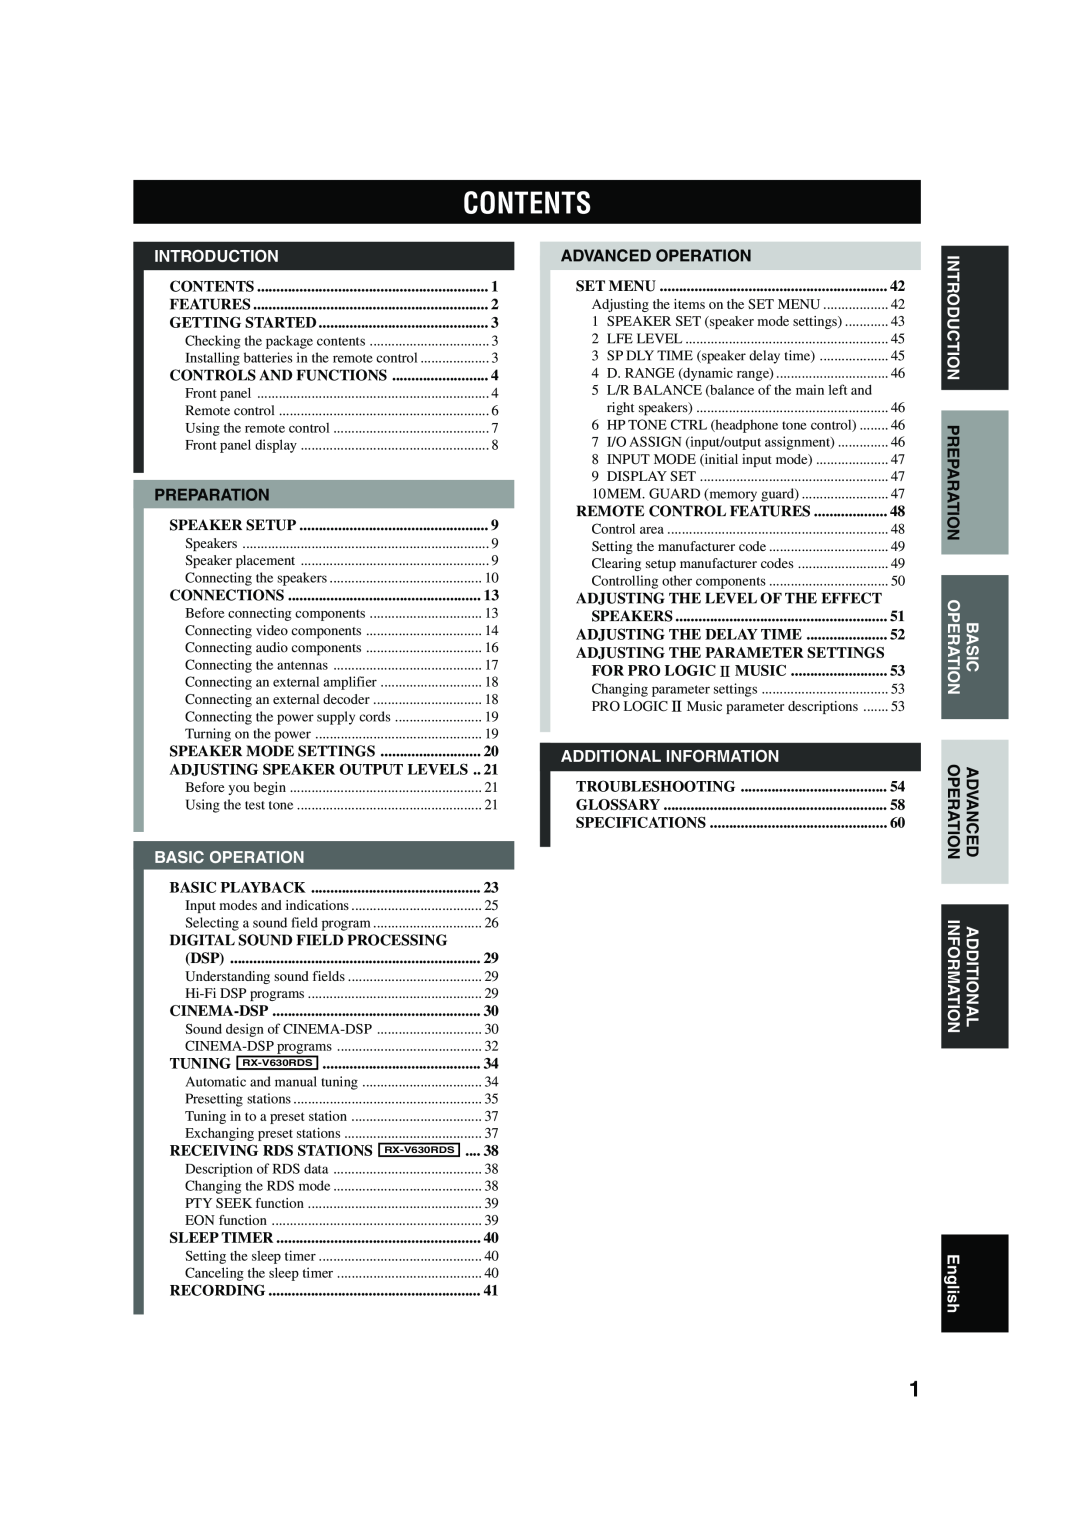 Yamaha RX-V630RDS owner manual Contents, Introduction, Additional Information, Basic Operation, English 